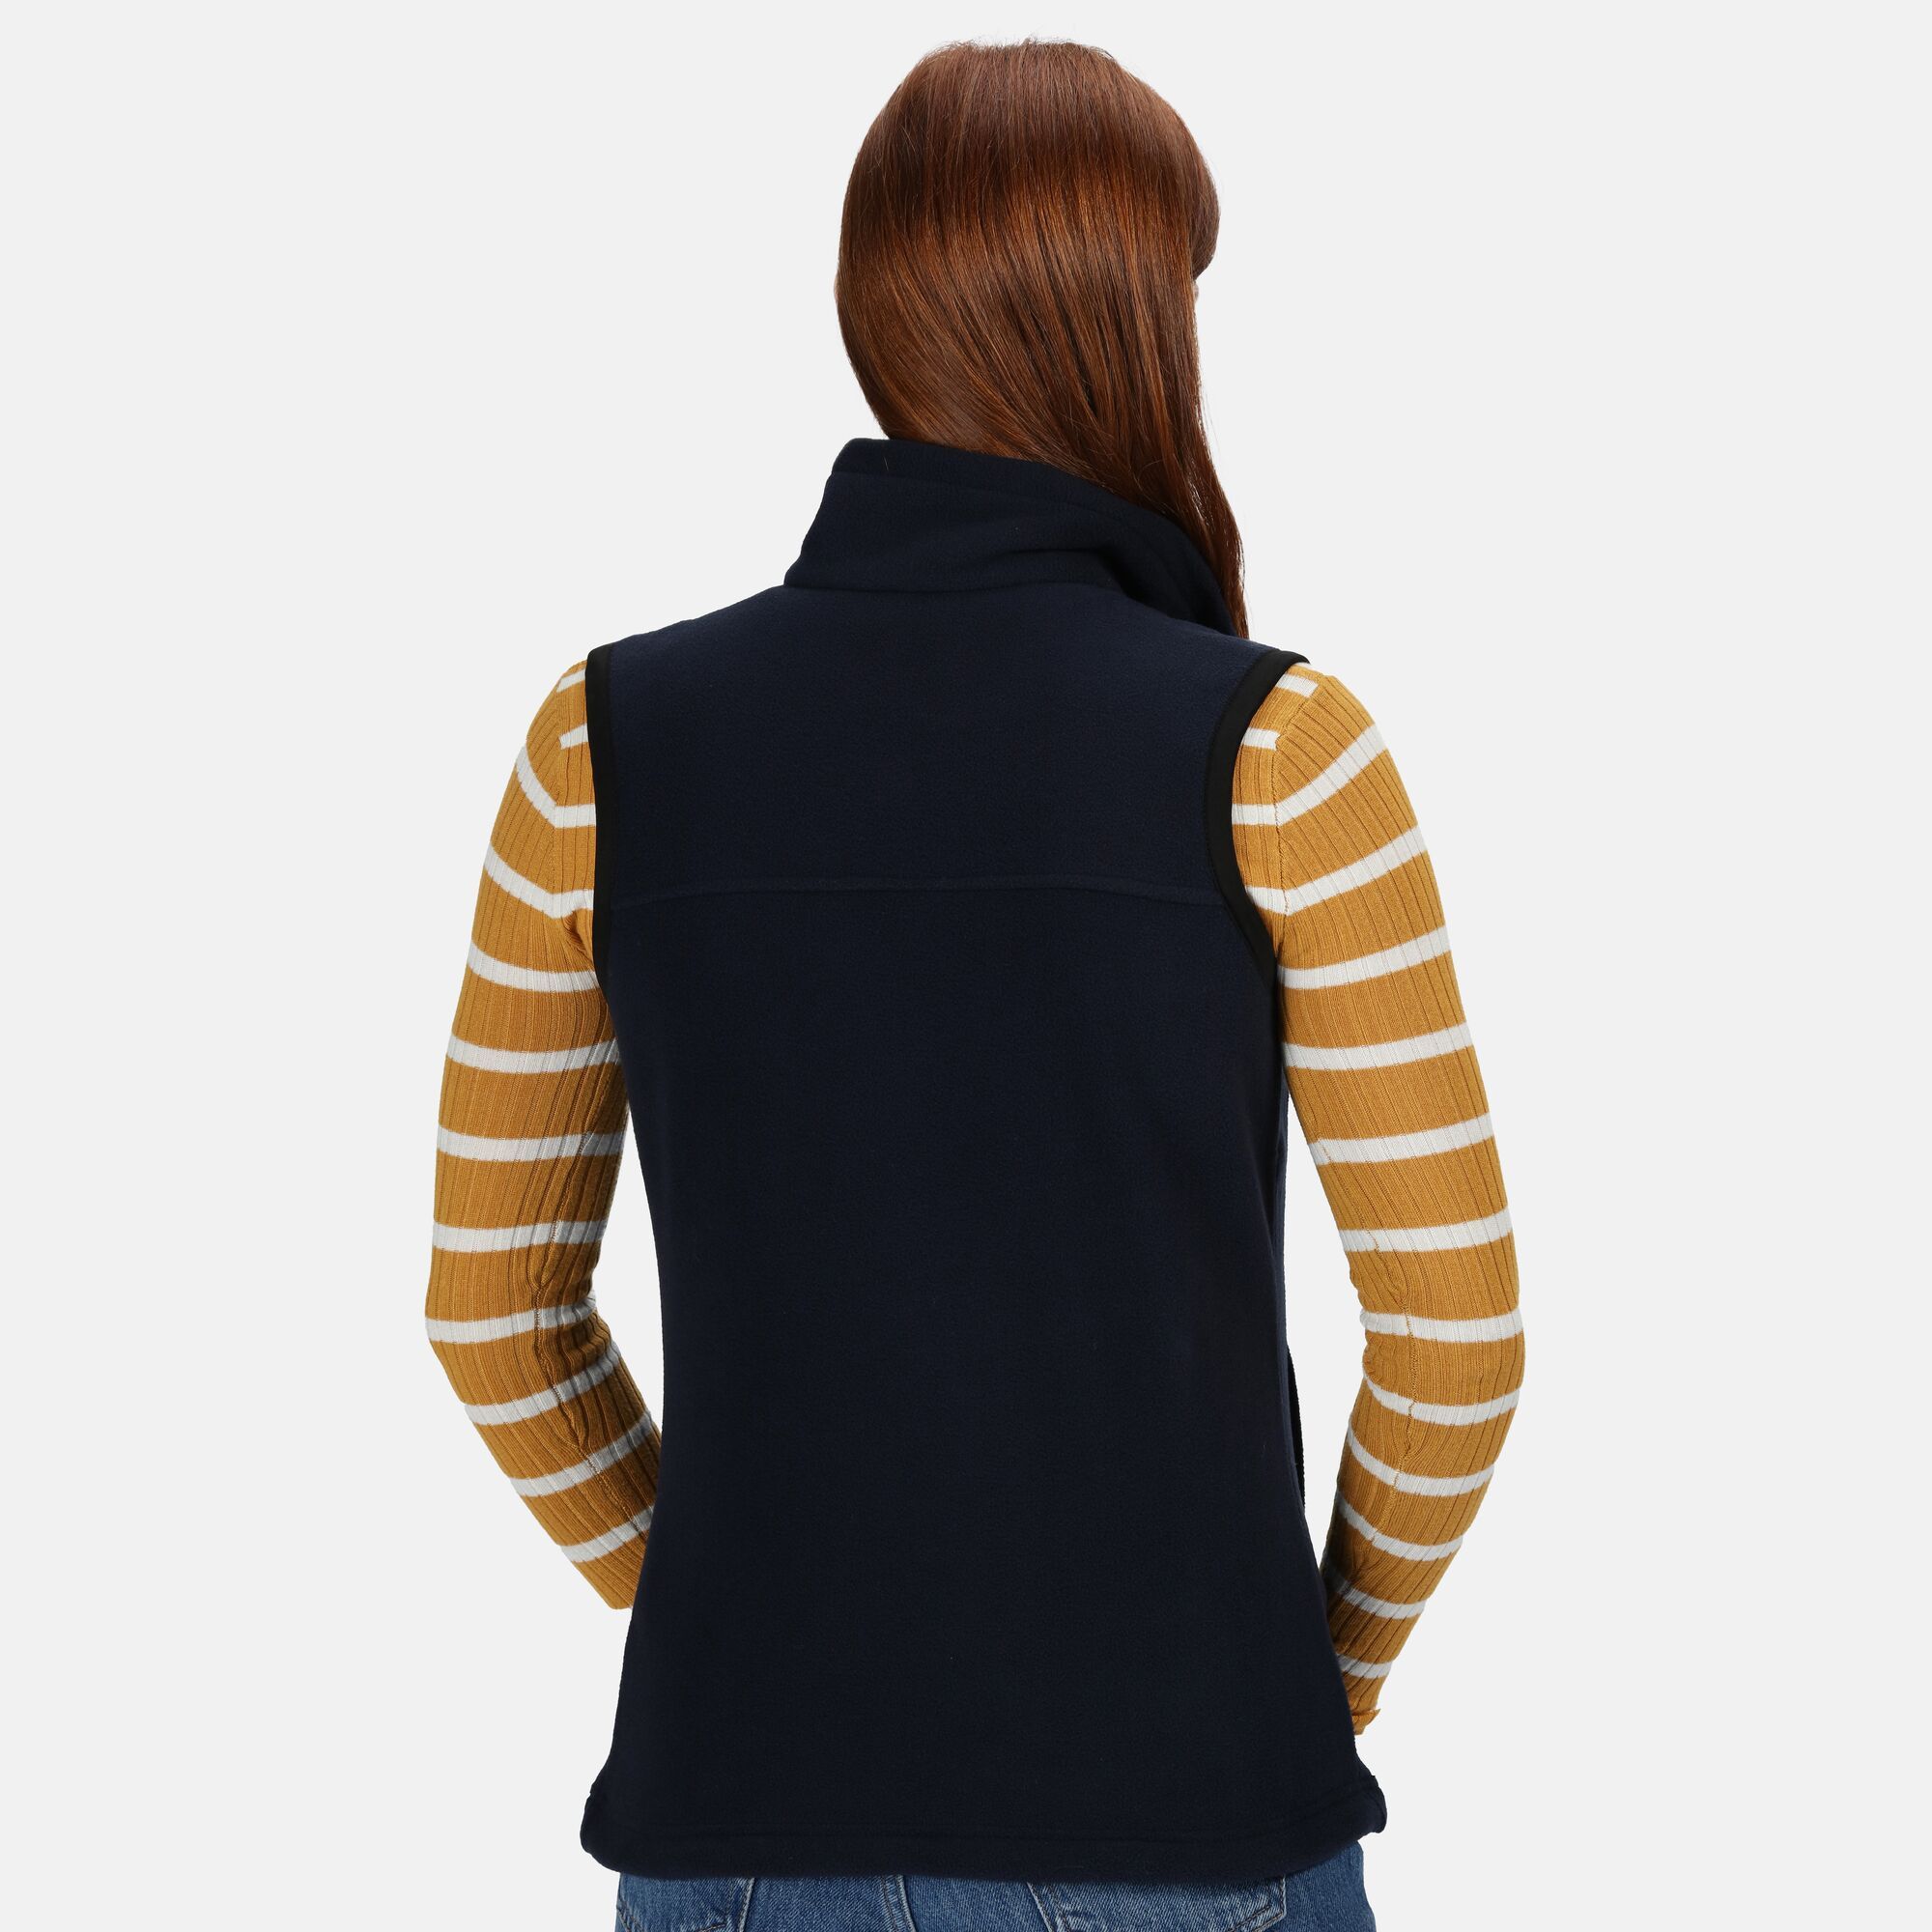 Interactive. Elasticated bound armholes. 2 zipped lower pockets. Adjustable shockcord hem. Shaped fit. Size 10, 12, 14, 16, 18, 20. Fabric 250 series anti-pill Symmetry fleece. Regatta Womens sizing (bust approx): 6 (30in/76cm), 8 (32in/81cm), 10 (34in/86cm), 12 (36in/92cm), 14 (38in/97cm), 16 (40in/102cm), 18 (43in/109cm), 20 (45in/114cm), 22 (48in/122cm), 24 (50in/127cm), 26 (52in/132cm), 28 (54in/137cm), 30 (56in/142cm), 32 (58in/147cm), 34 (60in/152cm), 36 (62in/158cm). 100% polyester.